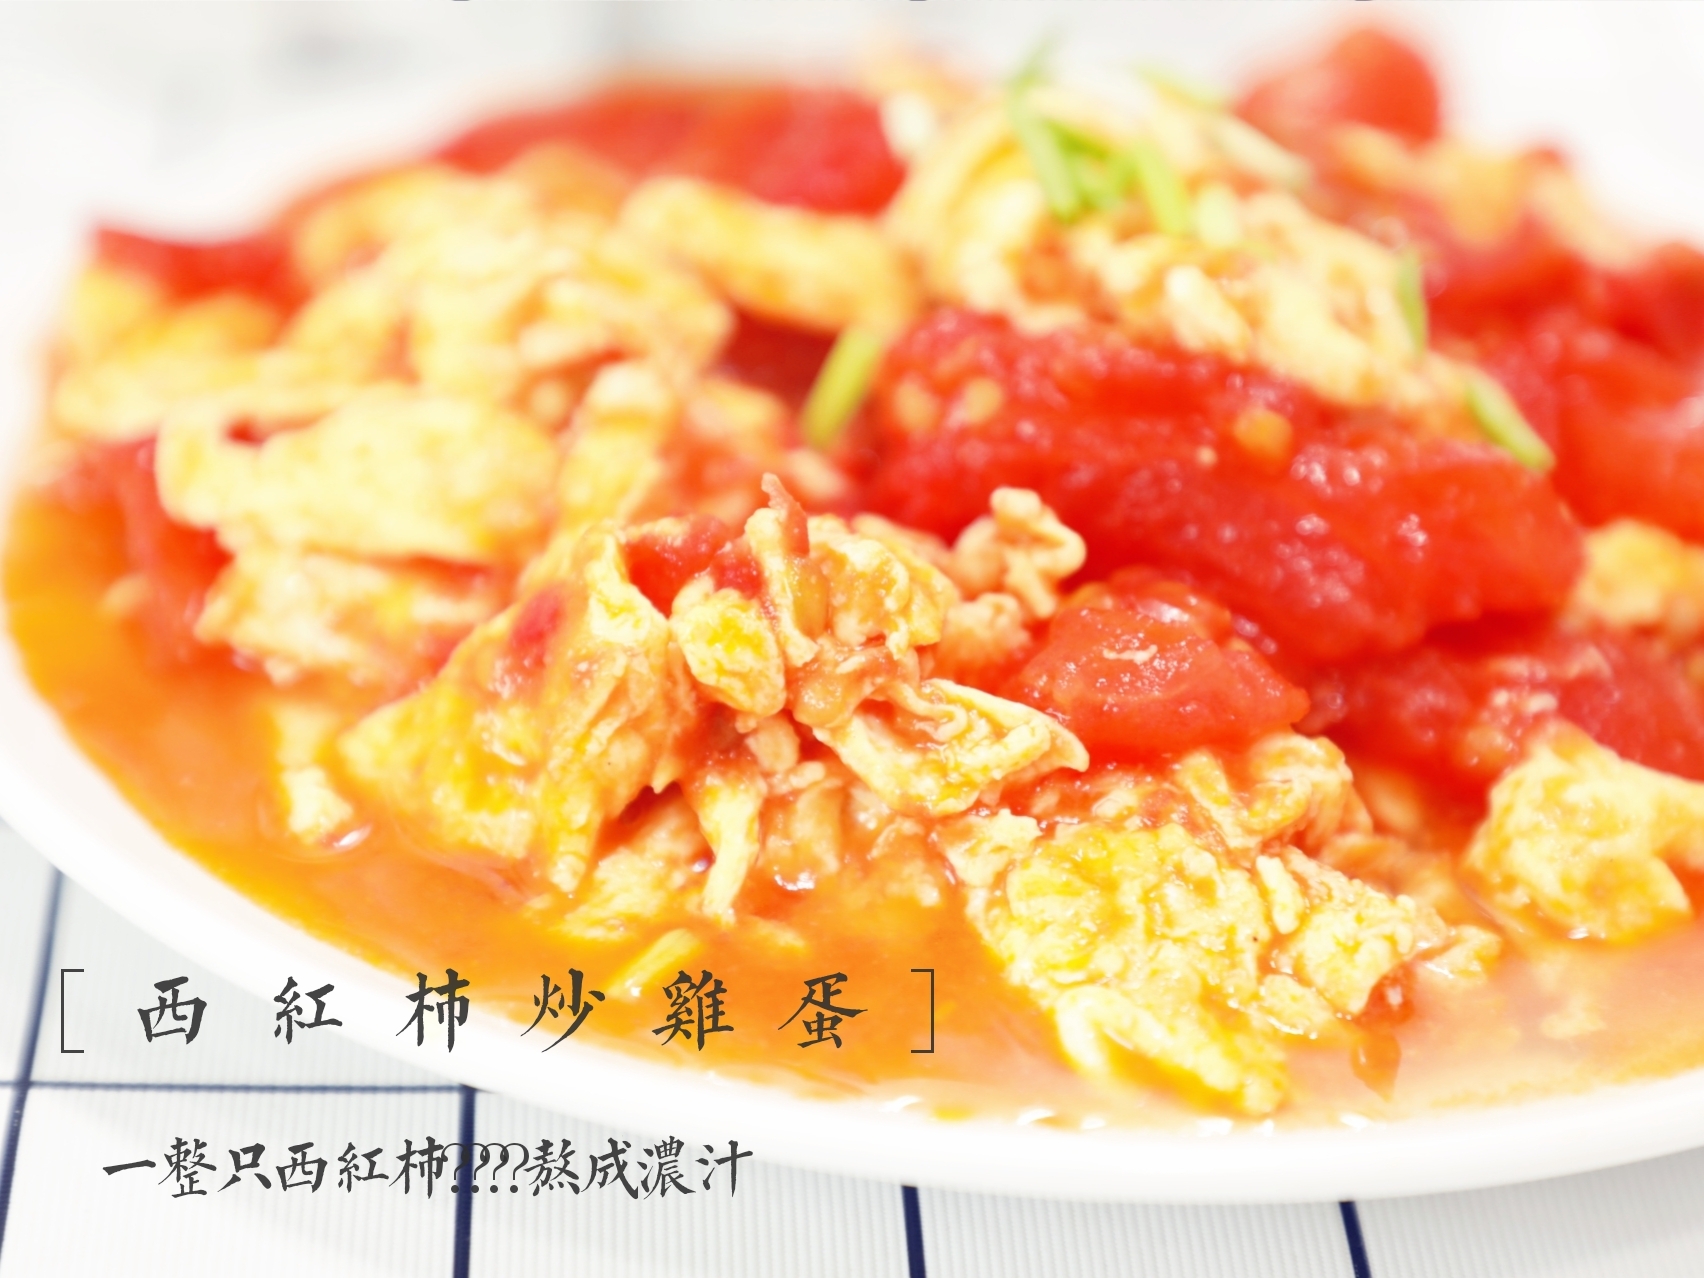 
When tomato scrambles egg, impose this one condition more, the egg is sweet tender the practice of tasty